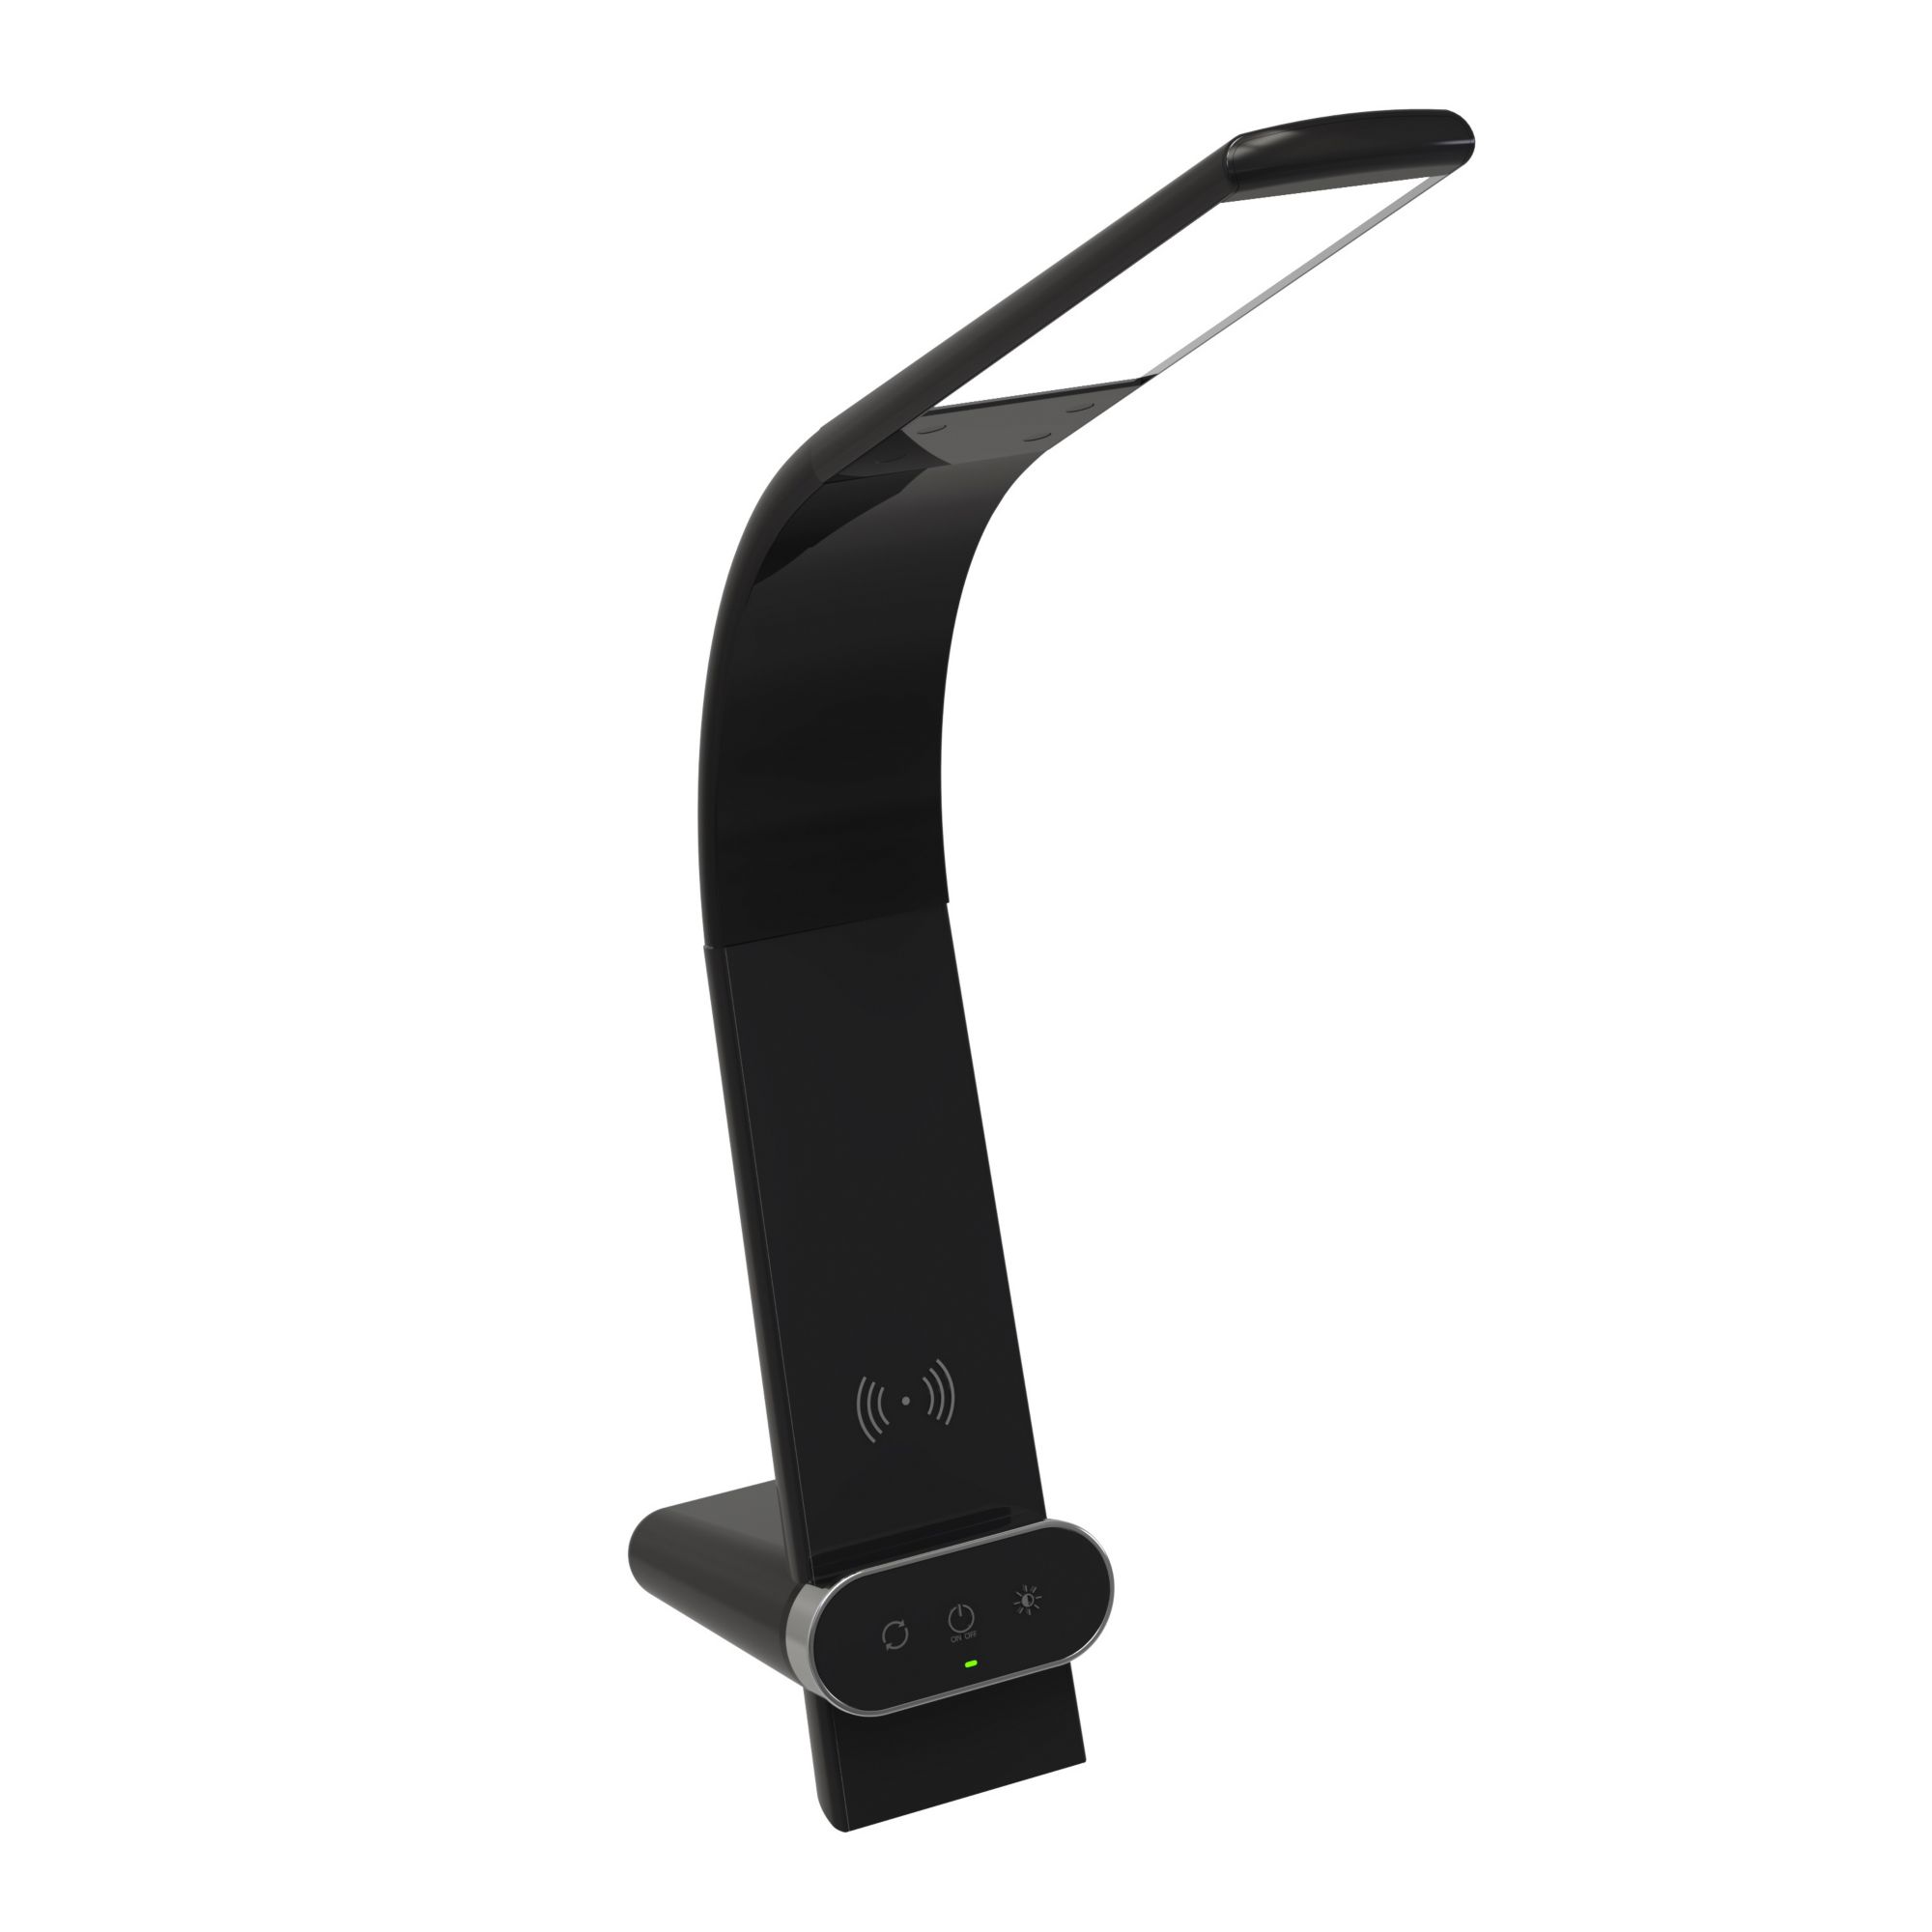 Brooklyn - LED Desk Lamp - with USB-A ports - by LUX LED Lighting